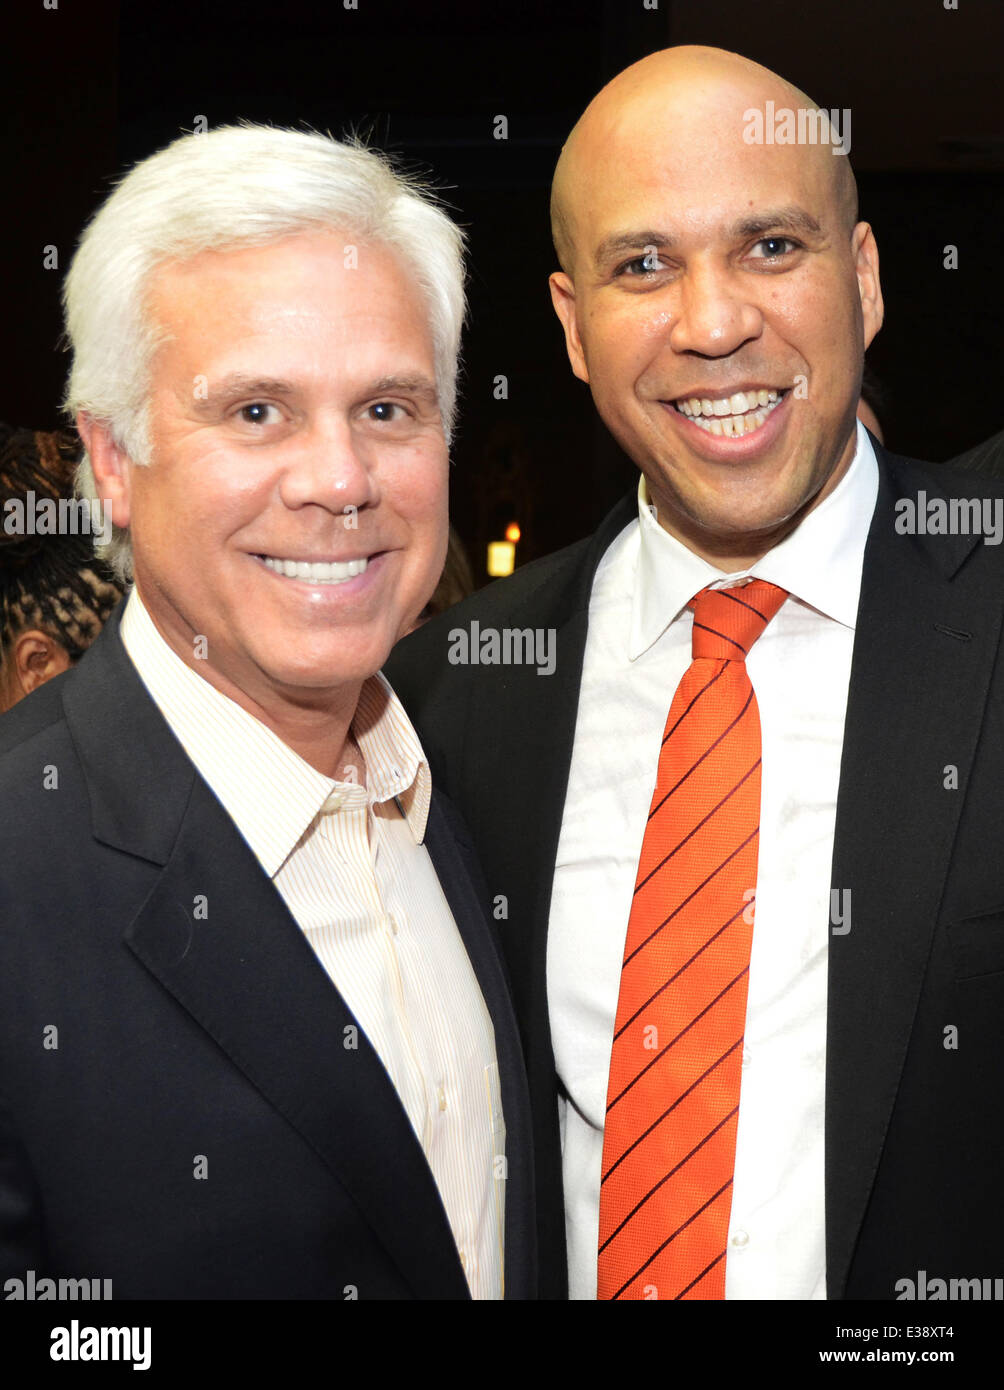 23rd Annual Stu Bykofsky Candidates' Comedy Night to benefit the Variety Club at Finnegan's Wake  Featuring: George Norcross,Cory Booker Where: Philadelphia, United States When: 21 Aug 2013 Stock Photo